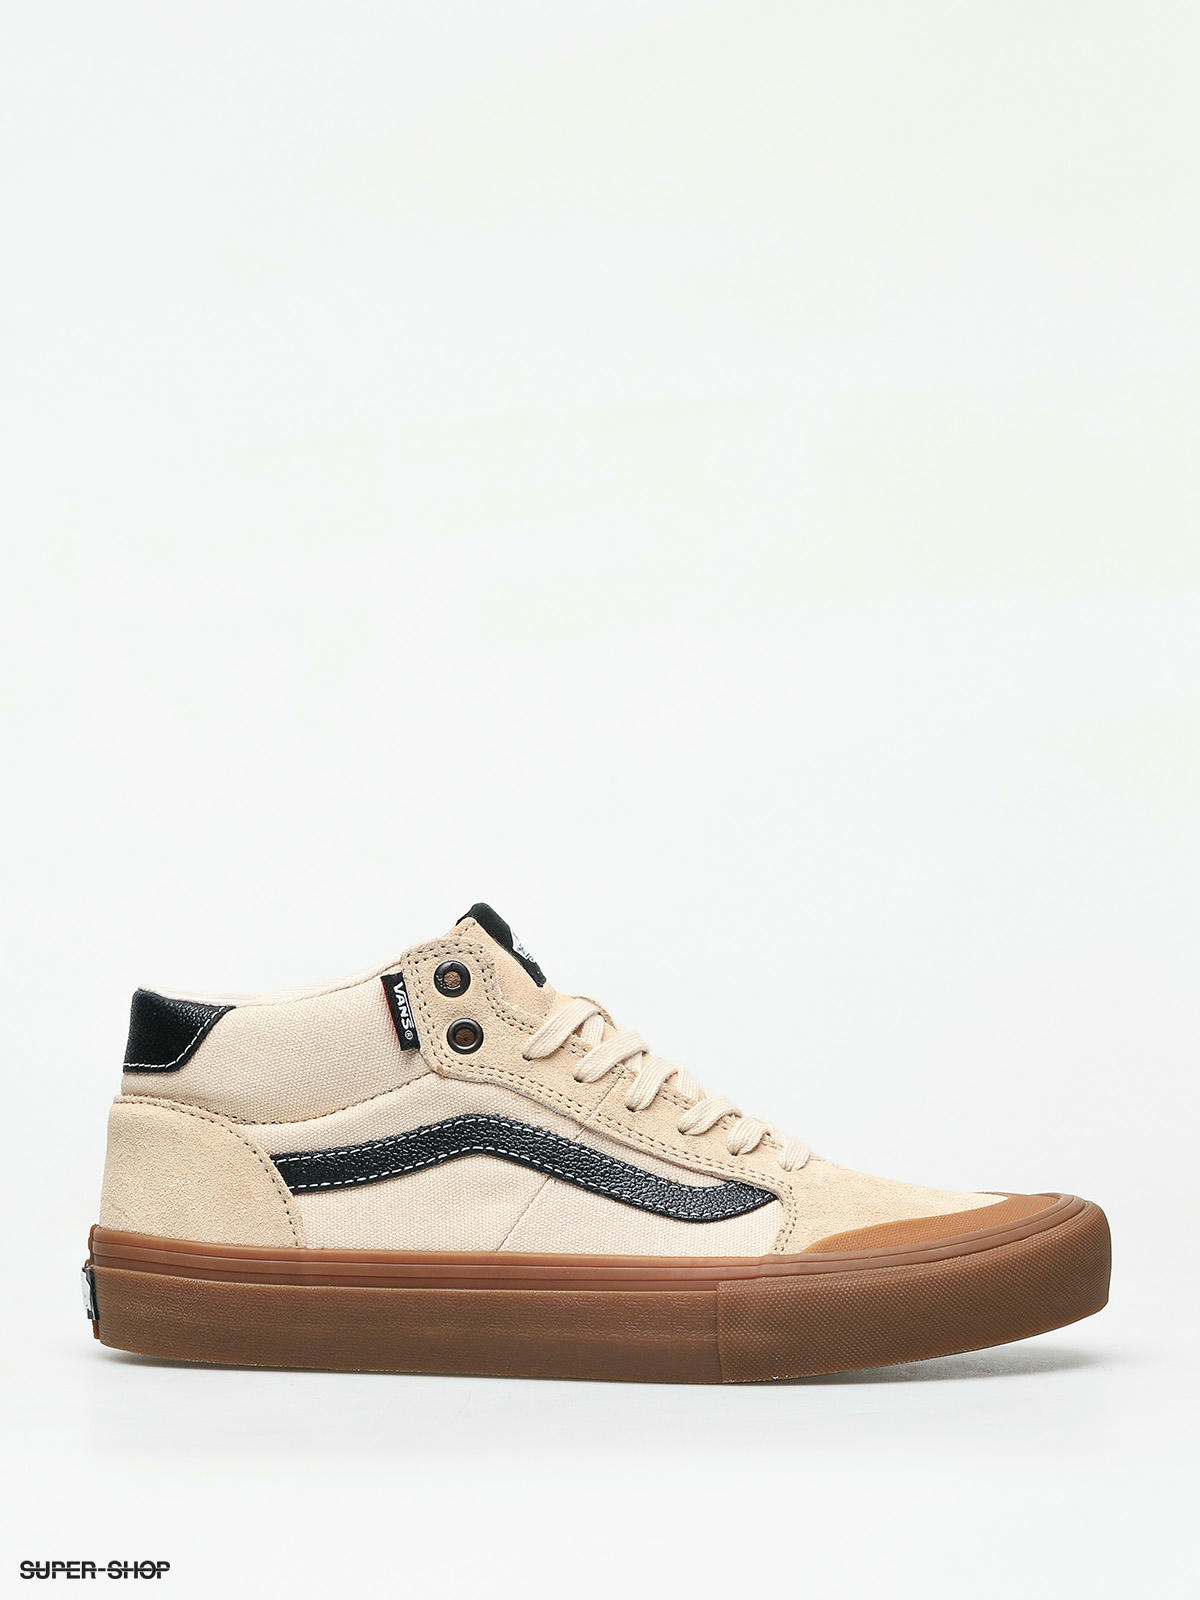 Vans Style 112 Mid Pro Shoes (ty morrow 